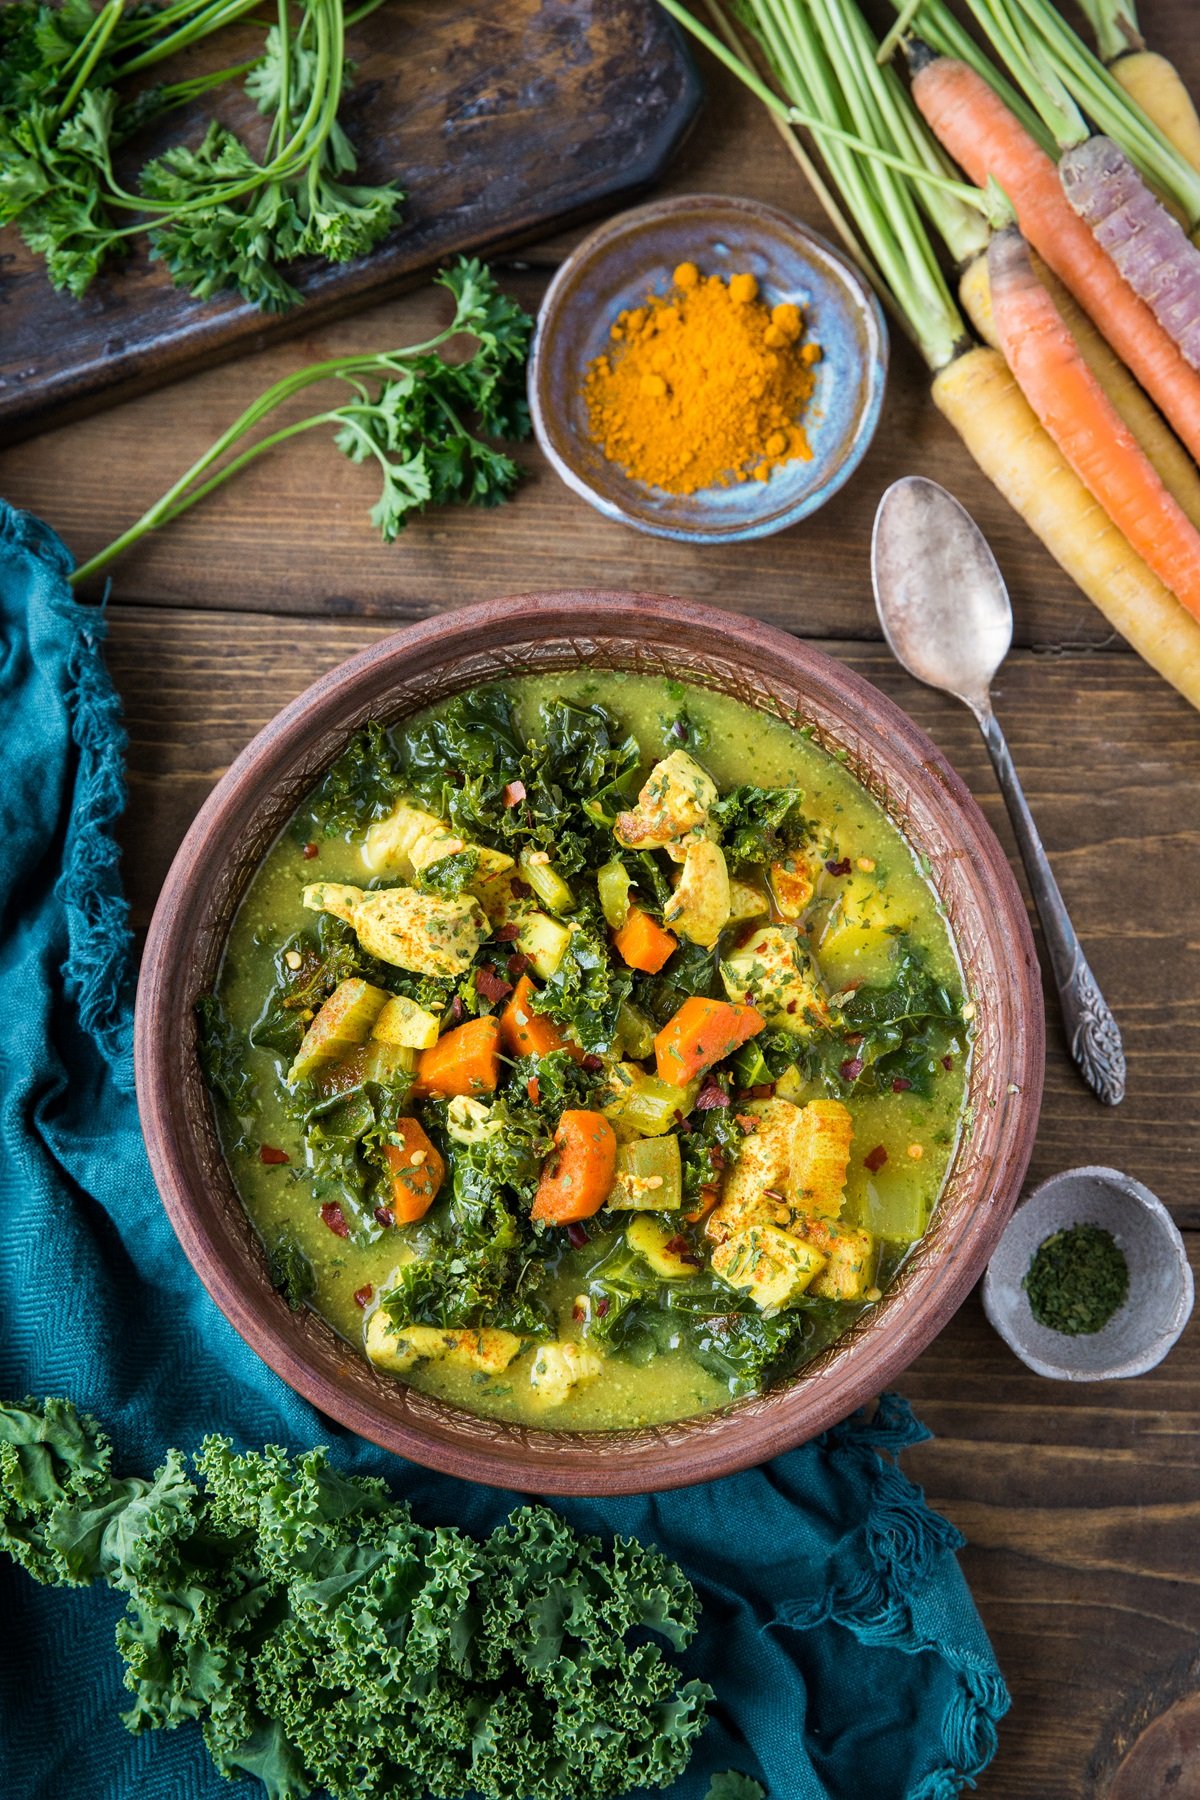 Immunity-Boosting Turmeric Chicken Soup with kale, carrots, parsnips, ginger, and bone broth. A superfood bowl of soup that happens to be paleo, keto, and whole30 | TheRoastedRoot.com #glutenfree